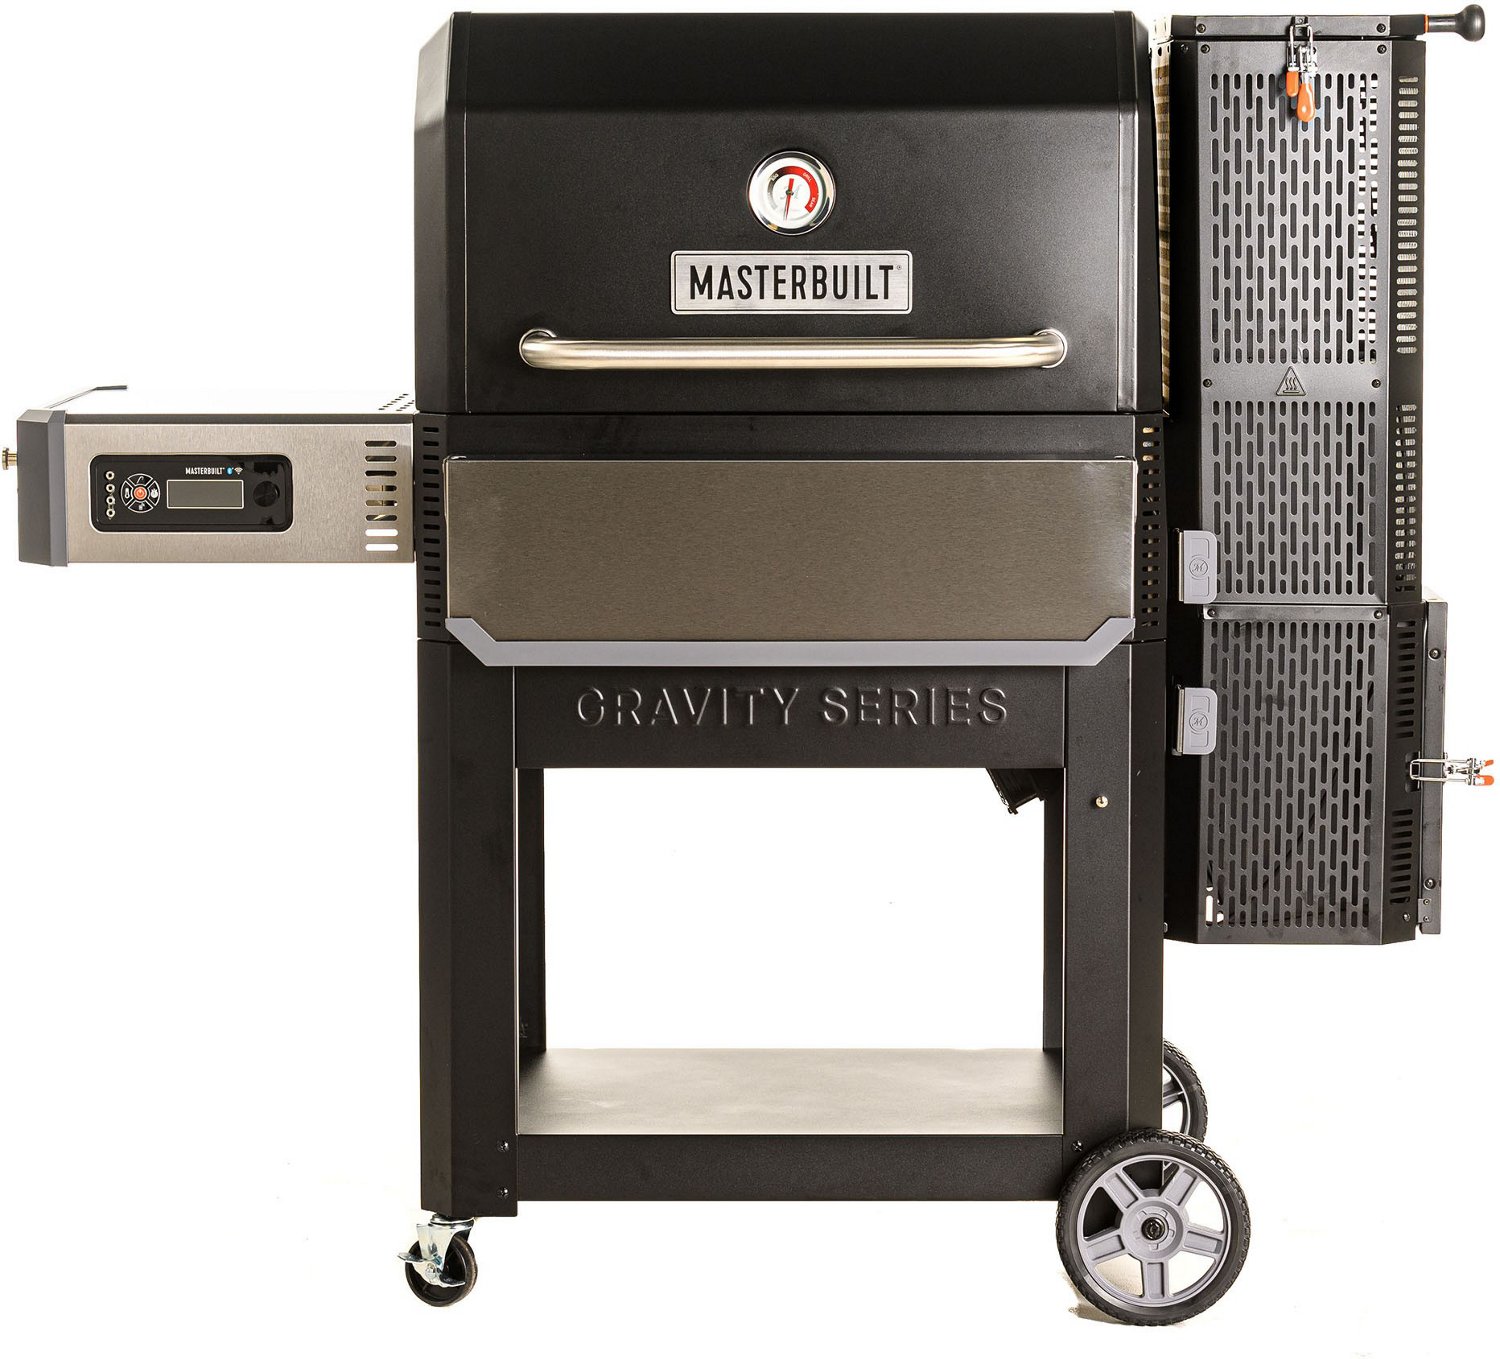 Masterbuilt Gravity Series 1050 Digital Charcoal Grill and Smoker                                                                - view number 1 selected